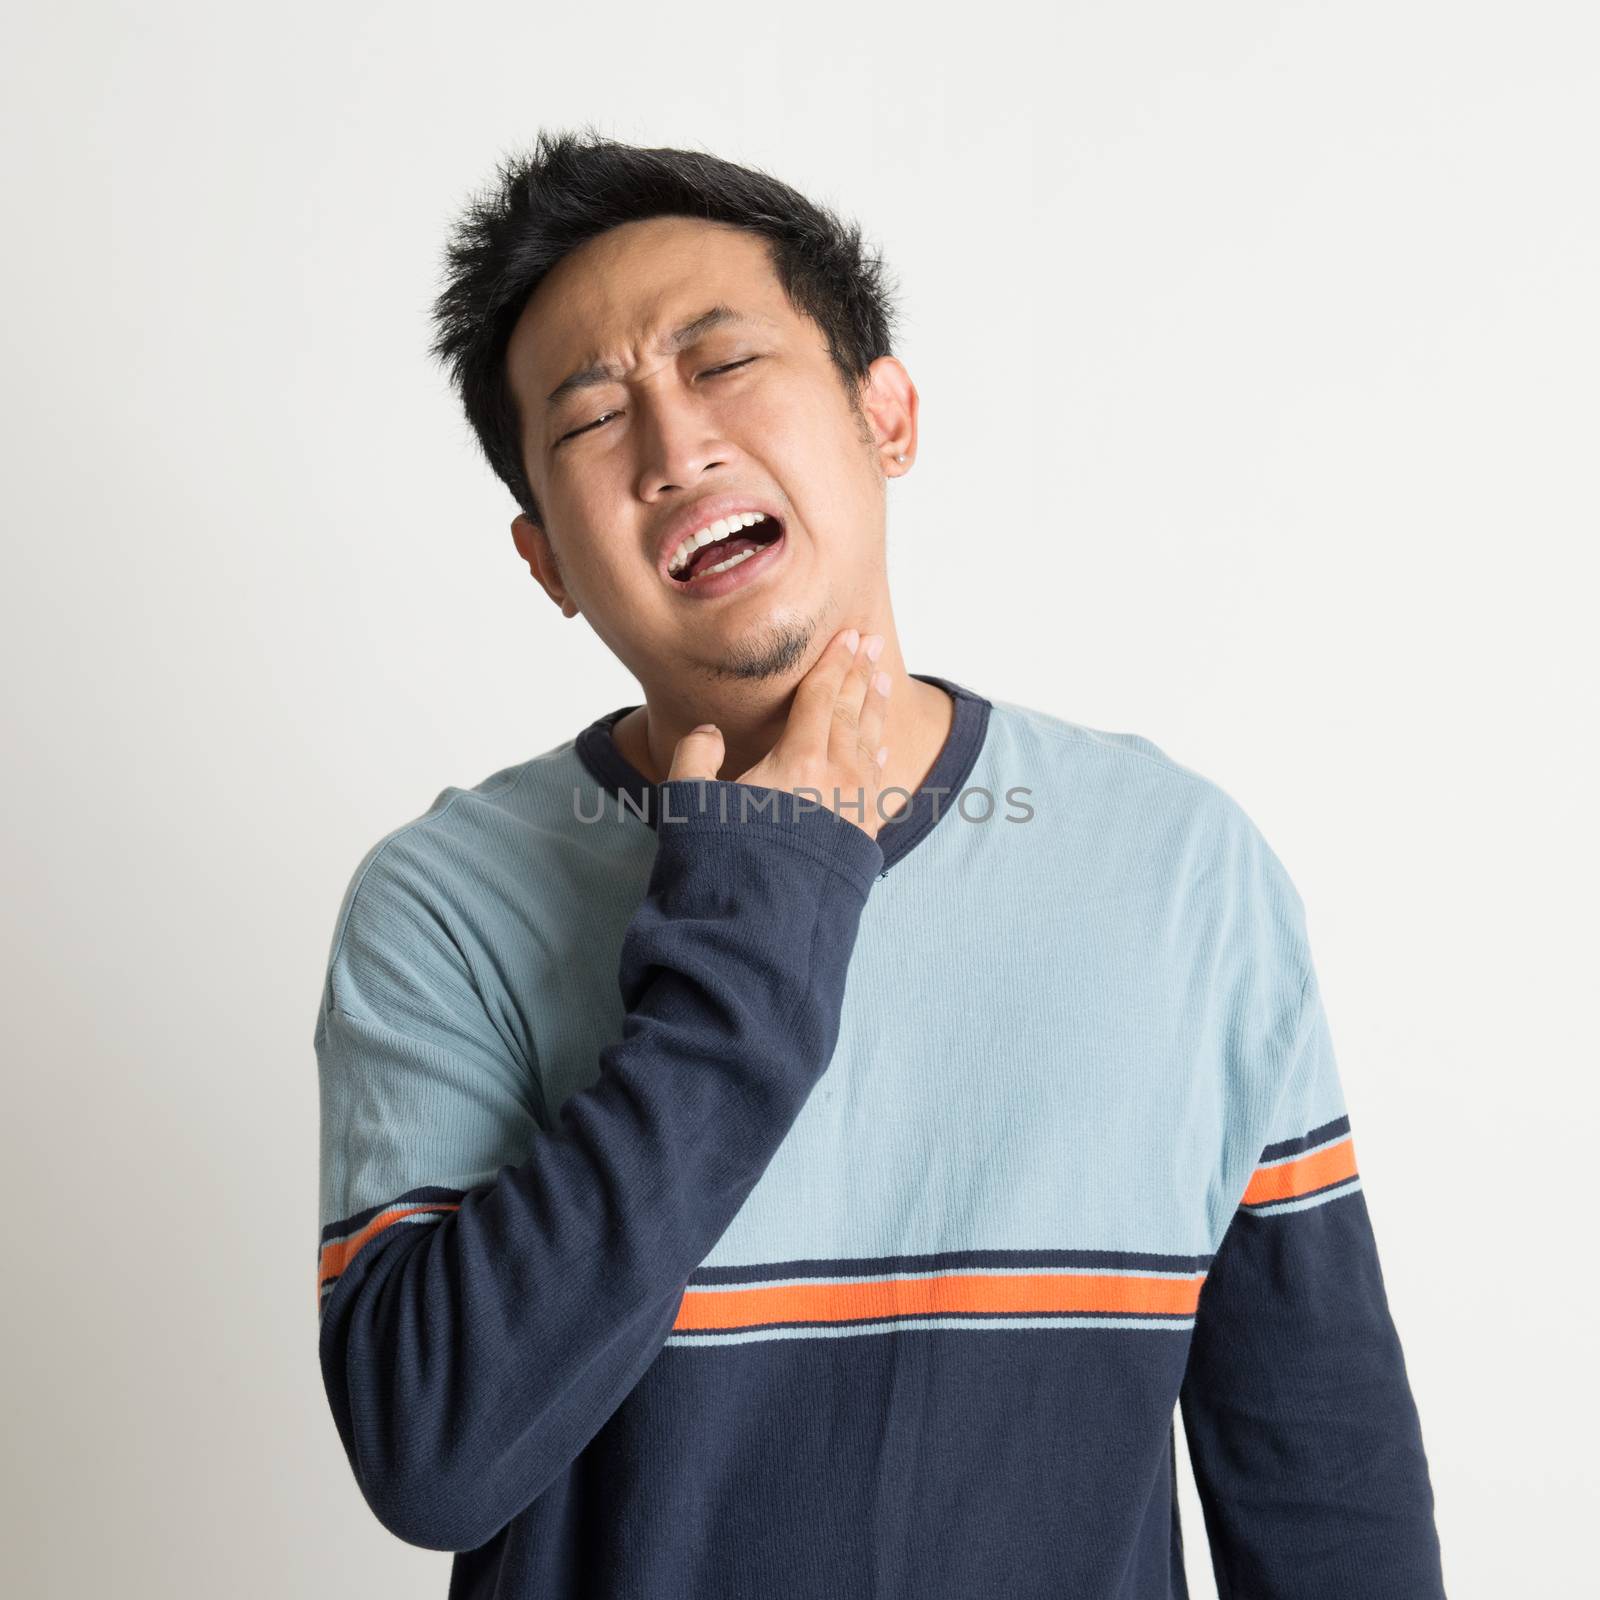 Asian male sore throat with painful face expression, on plain background